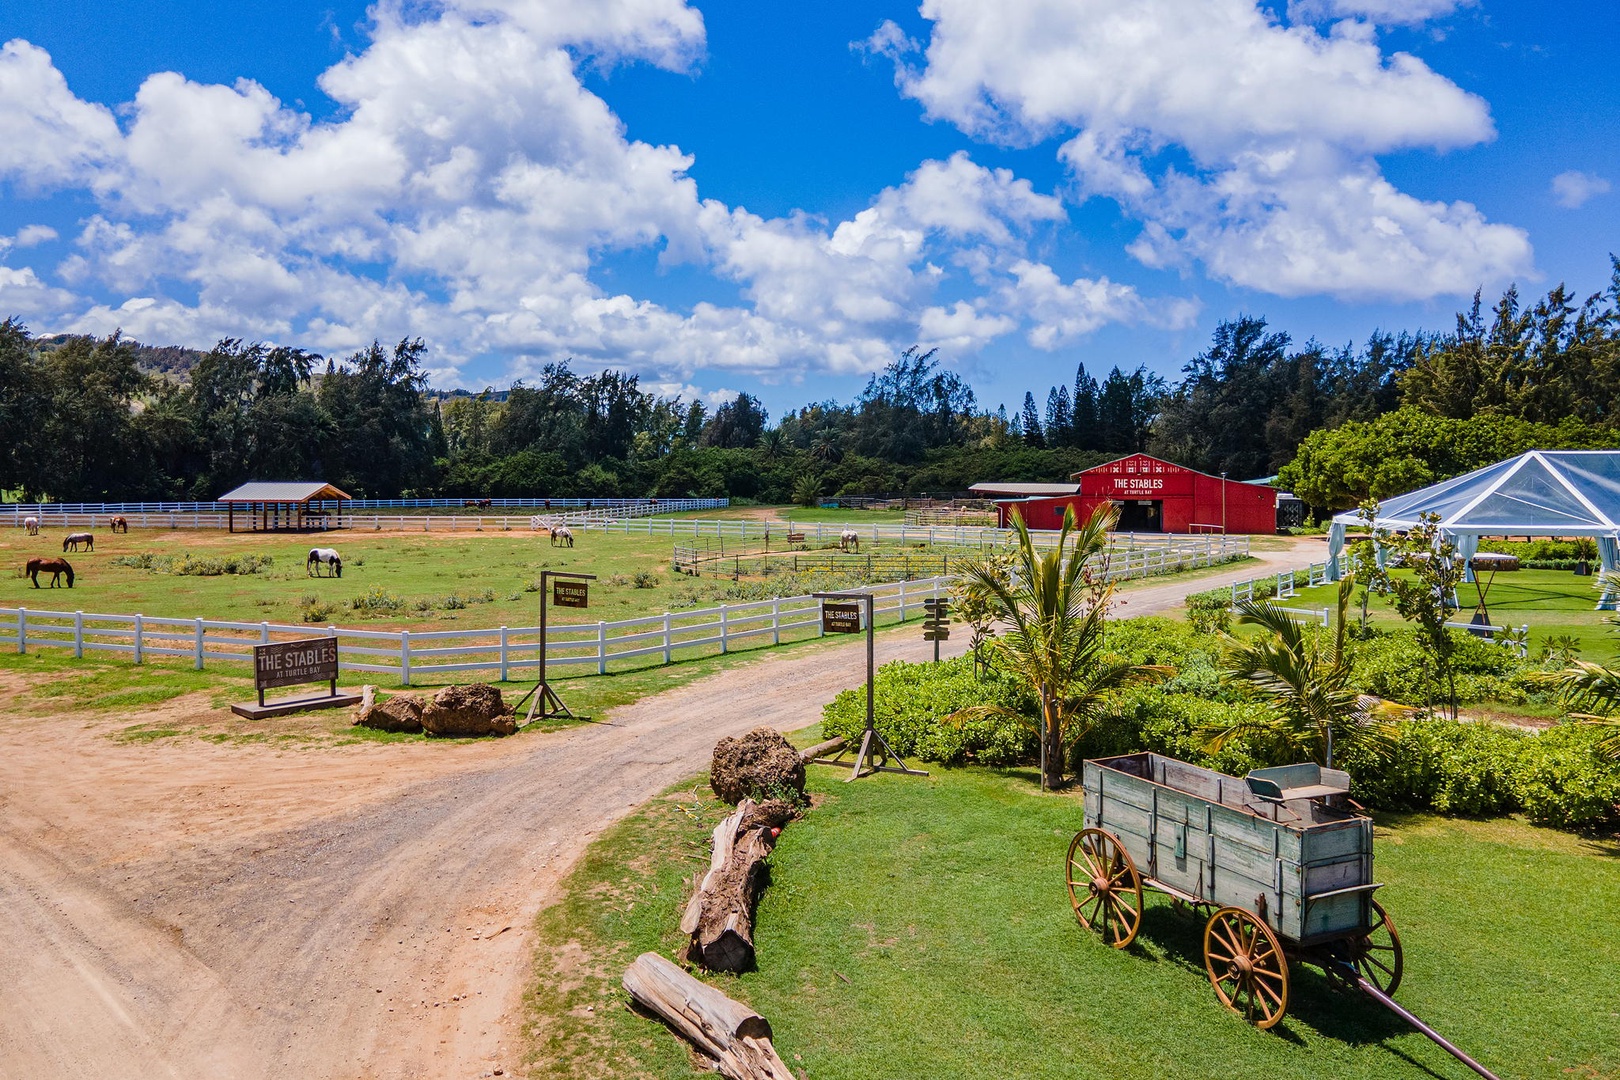 Kahuku Vacation Rentals, Turtle Bay's Kuilima Estates West #104 - Try your hand at horseback riding just outside the resort